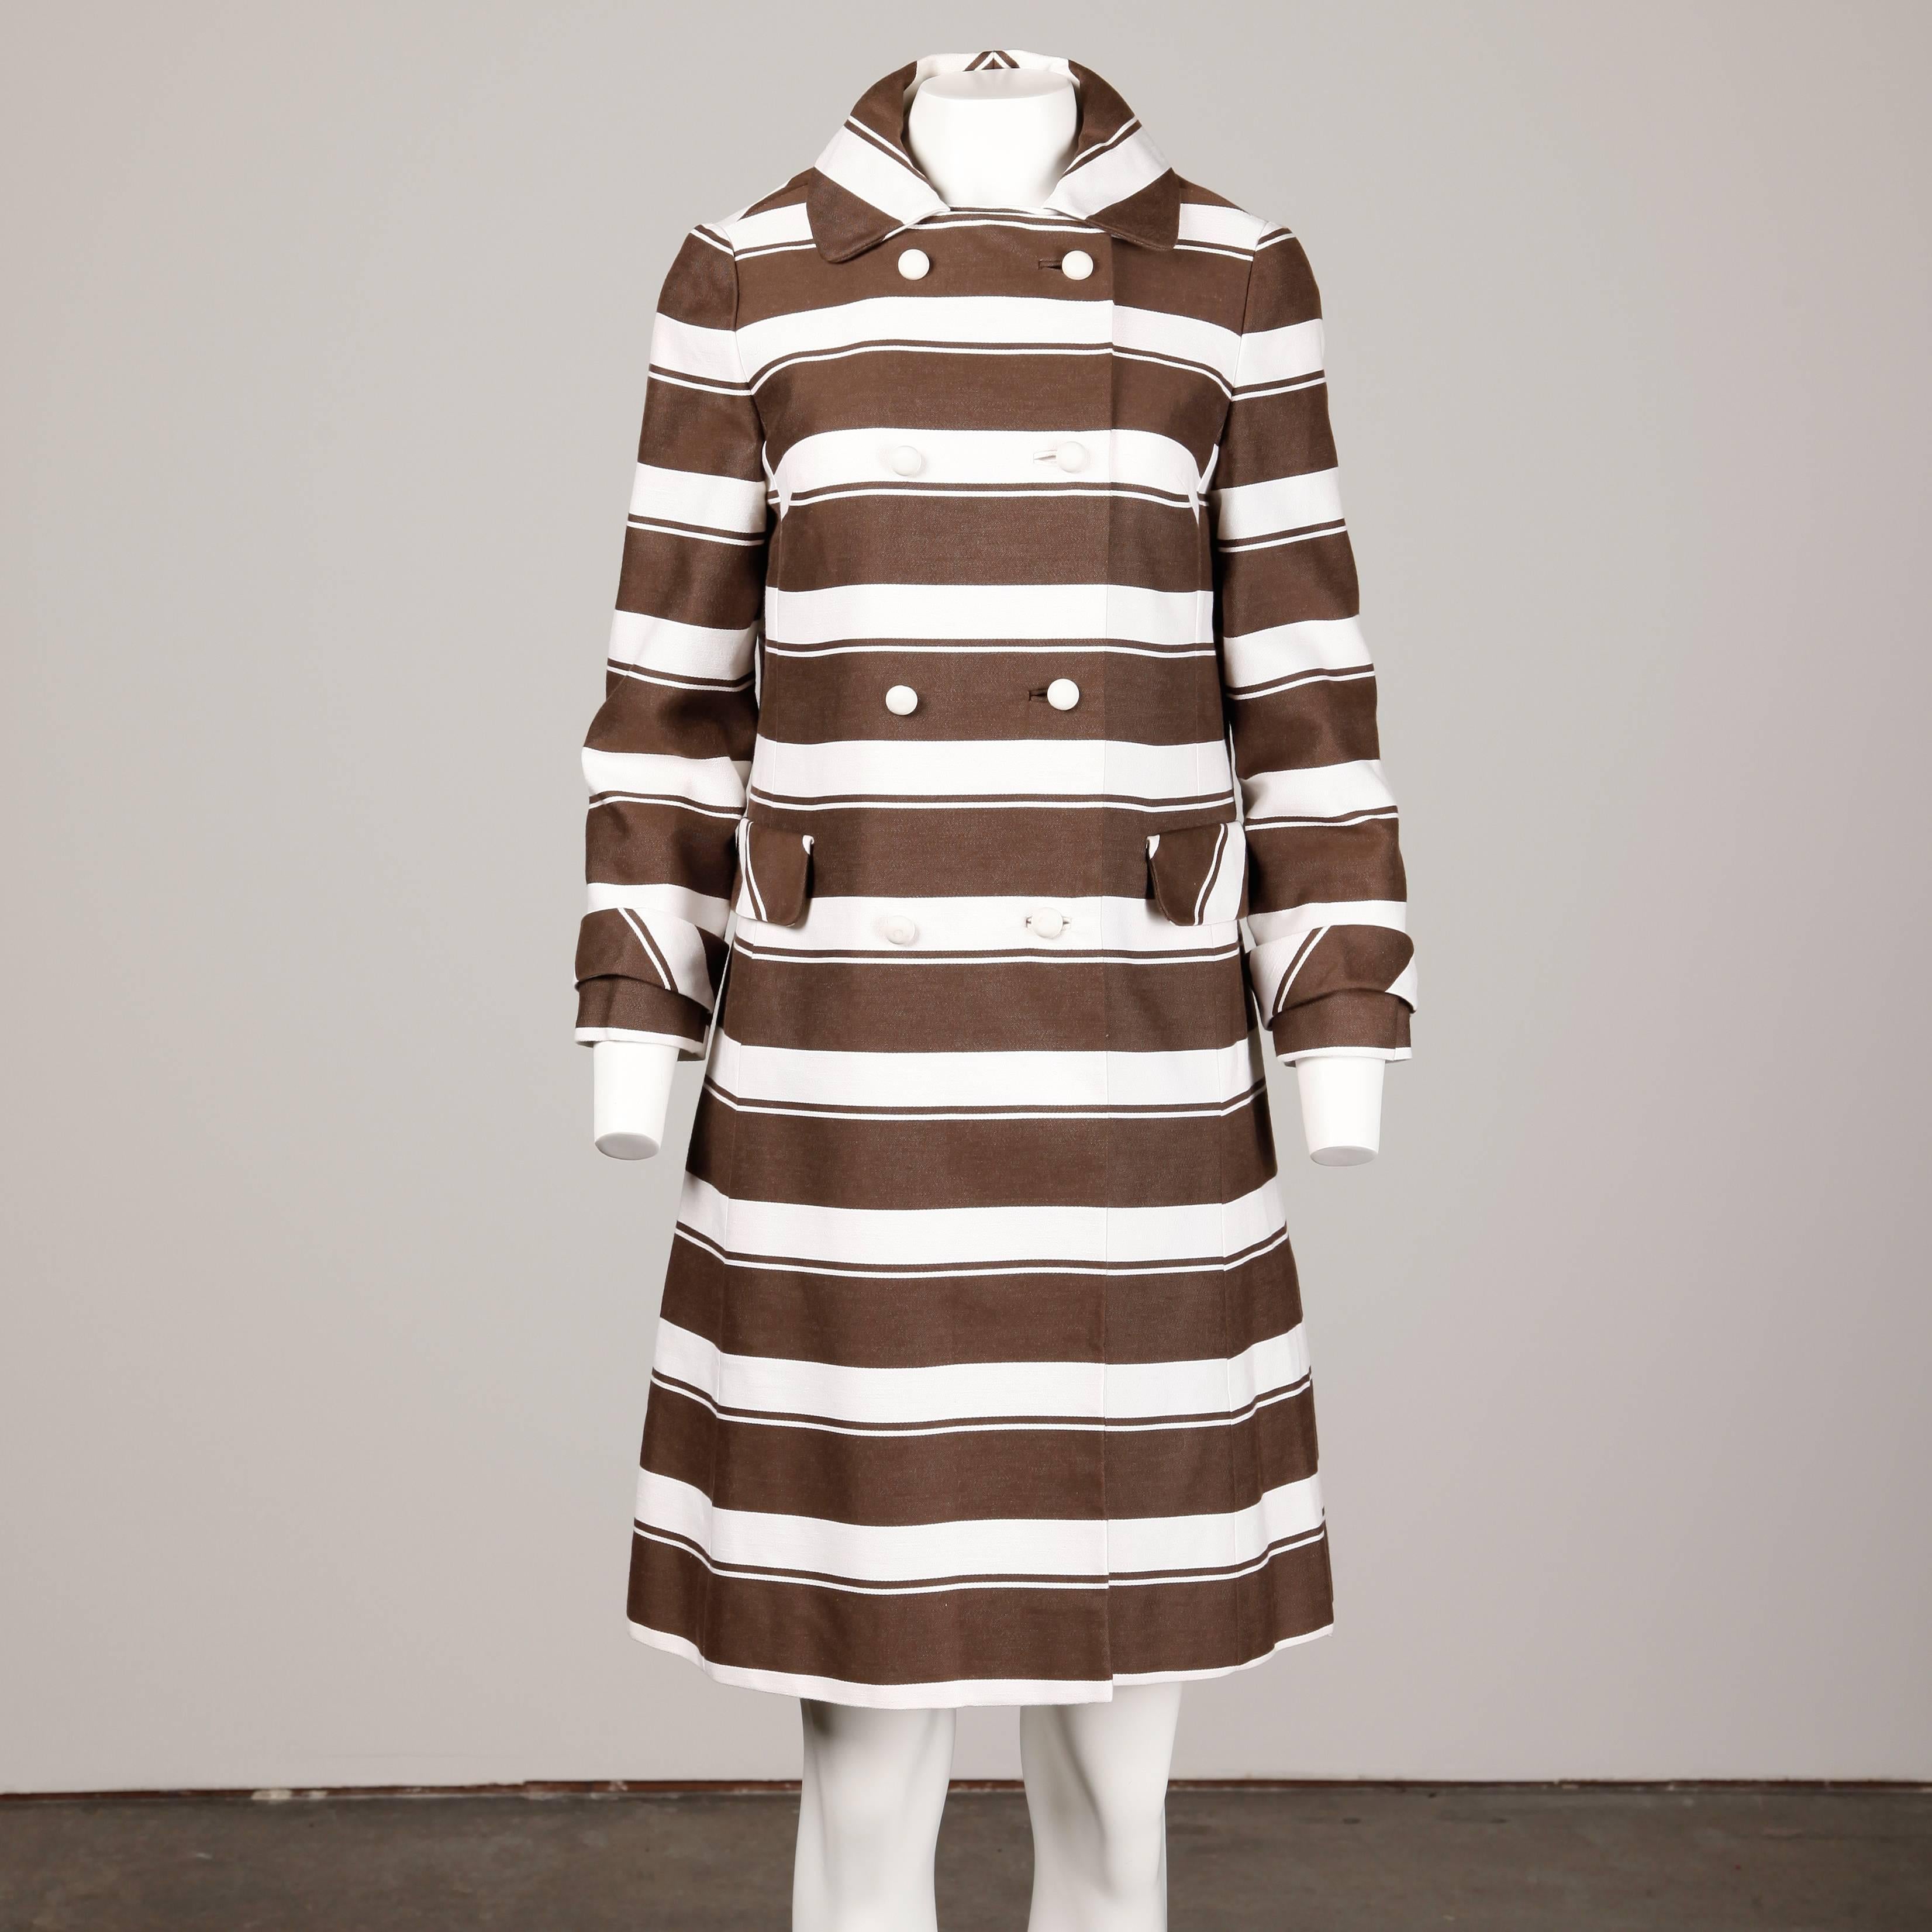 Vintage brown and white striped mod coat with bobble buttons by Sandra Sage. This fits like a modern size small.

Details: 

Fully Lined
Side Seam Pockets
Button Front Closure
Marked Size: Unmarked
Estimated Size: Small
Color: Brown/ White